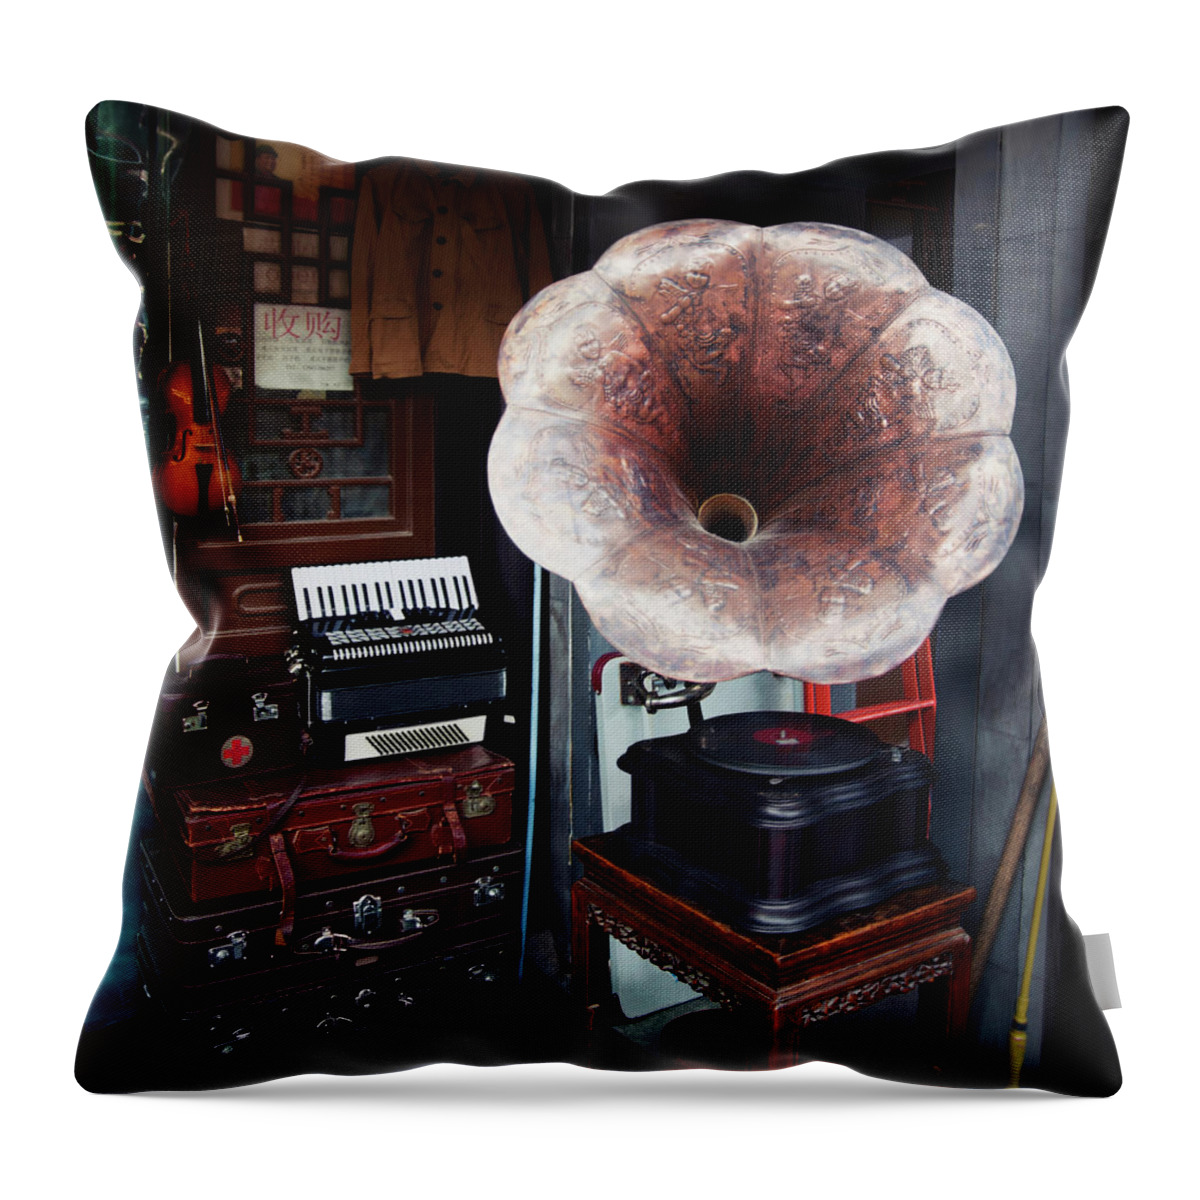 Flea Market Throw Pillow featuring the photograph Antique Victrola In Panjiayuan Flea by Design Pics / Keith Levit